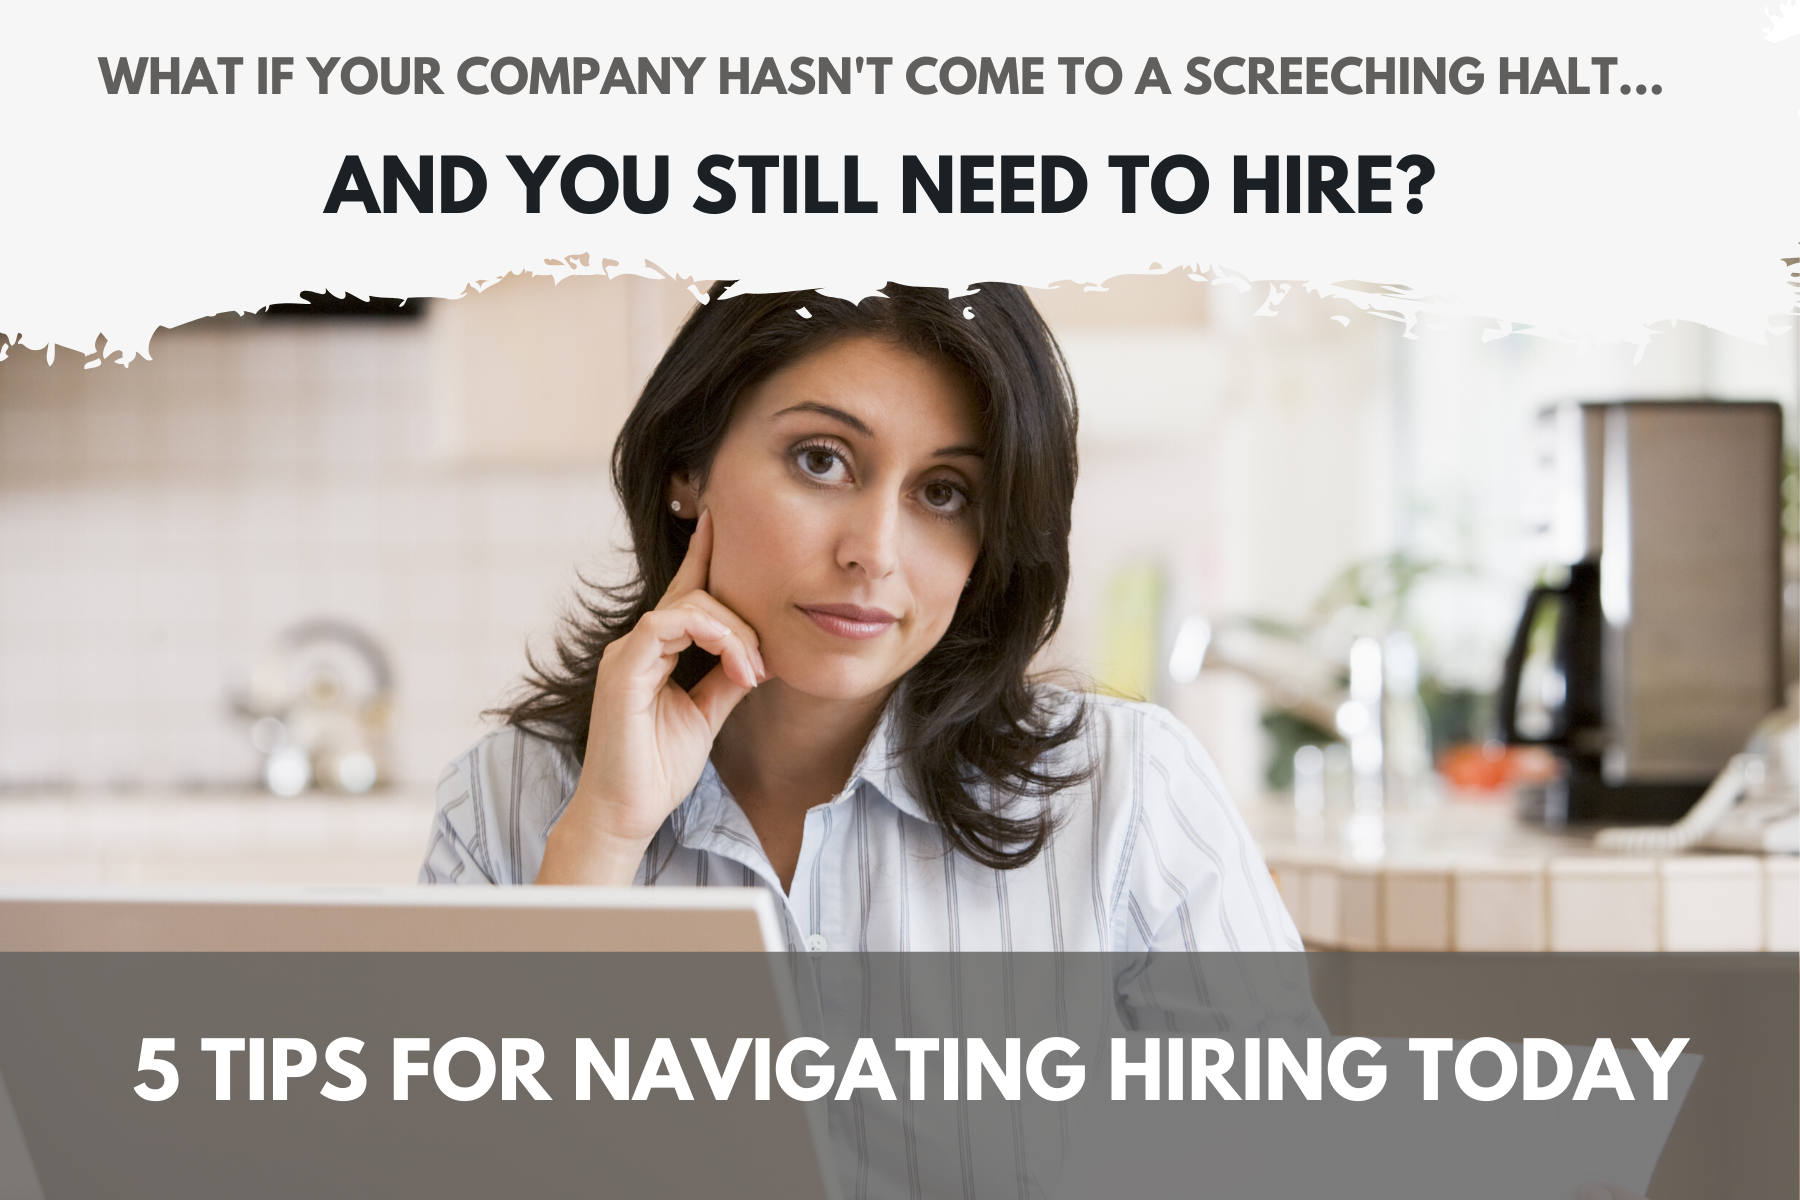 What if Your Company Hasn’t Come to a Screeching Halt – And You Still Need to Hire?